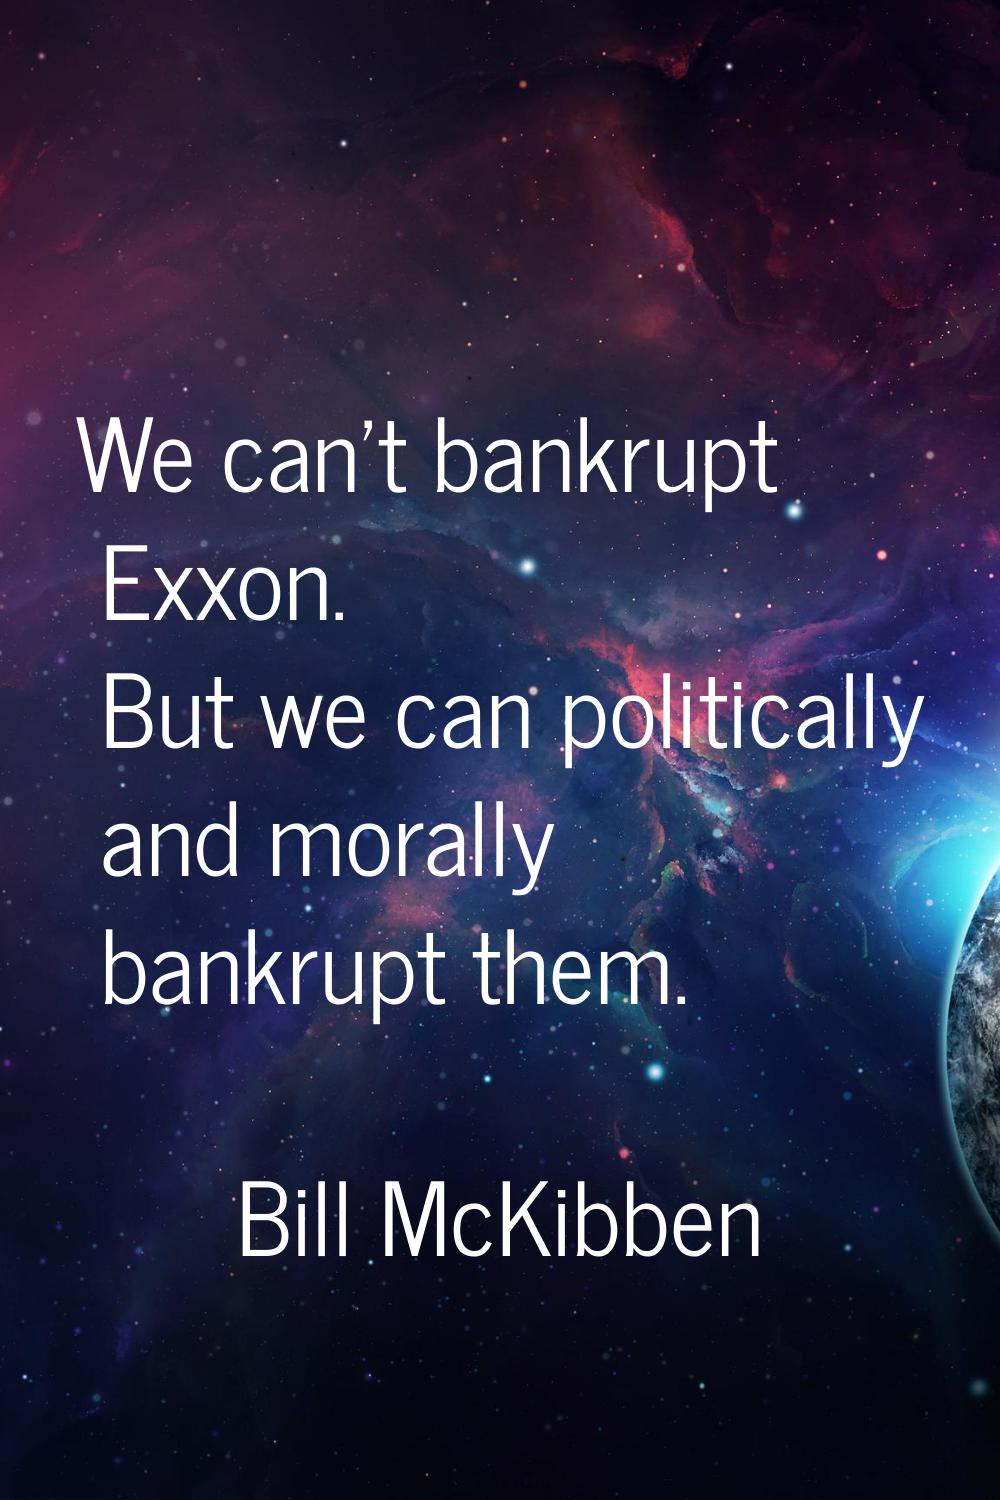 We can't bankrupt Exxon. But we can politically and morally bankrupt them.